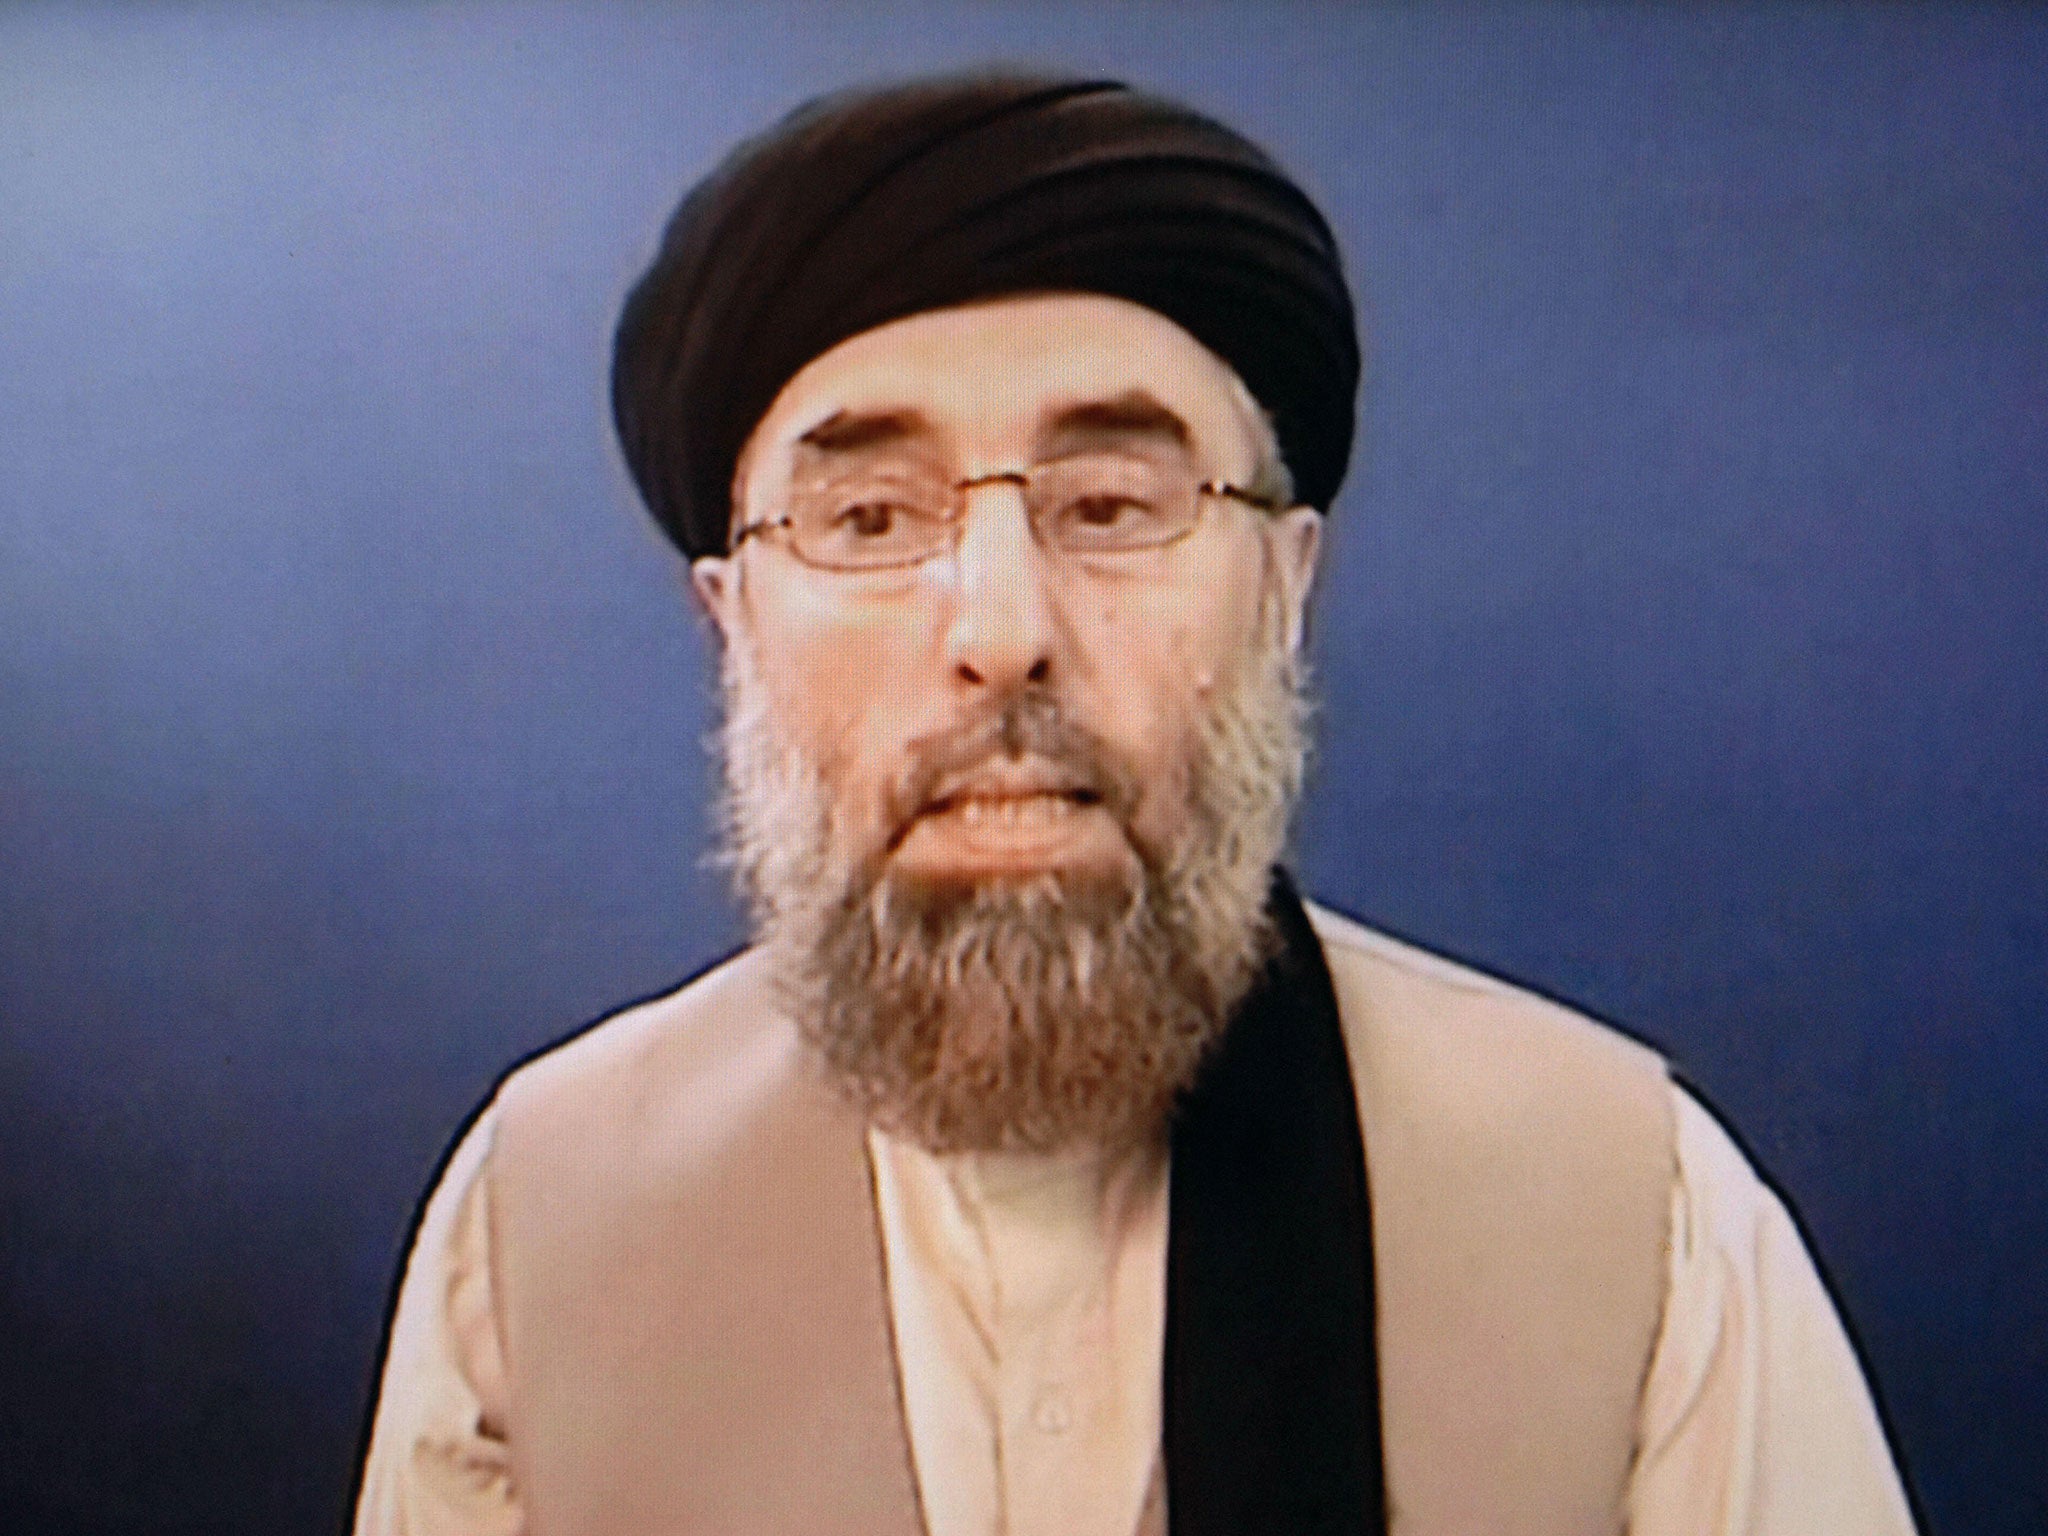 Renegade Afghan warlord Gulbuddin Hekmatyar answers AFP questions at an undisclosed location in Afghanistan